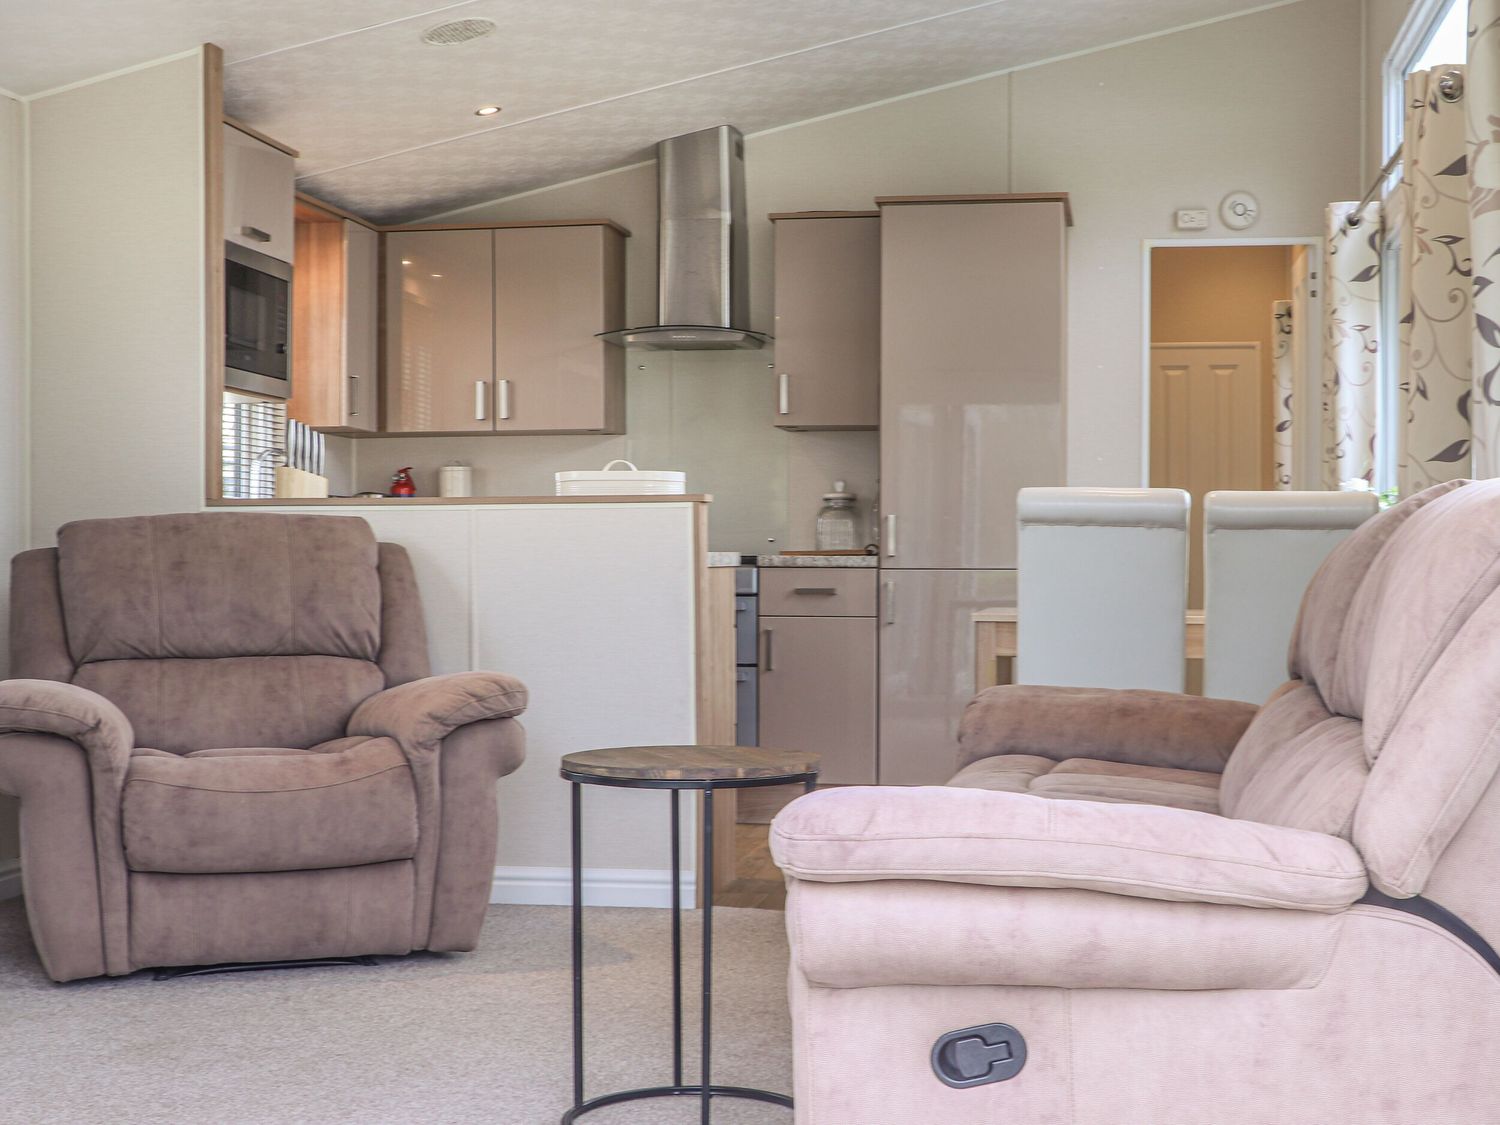 Tiptoes Lodge in Carnforth, Lancashire, off-road parking, dog-friendly, on-site facilities, 2bedroom